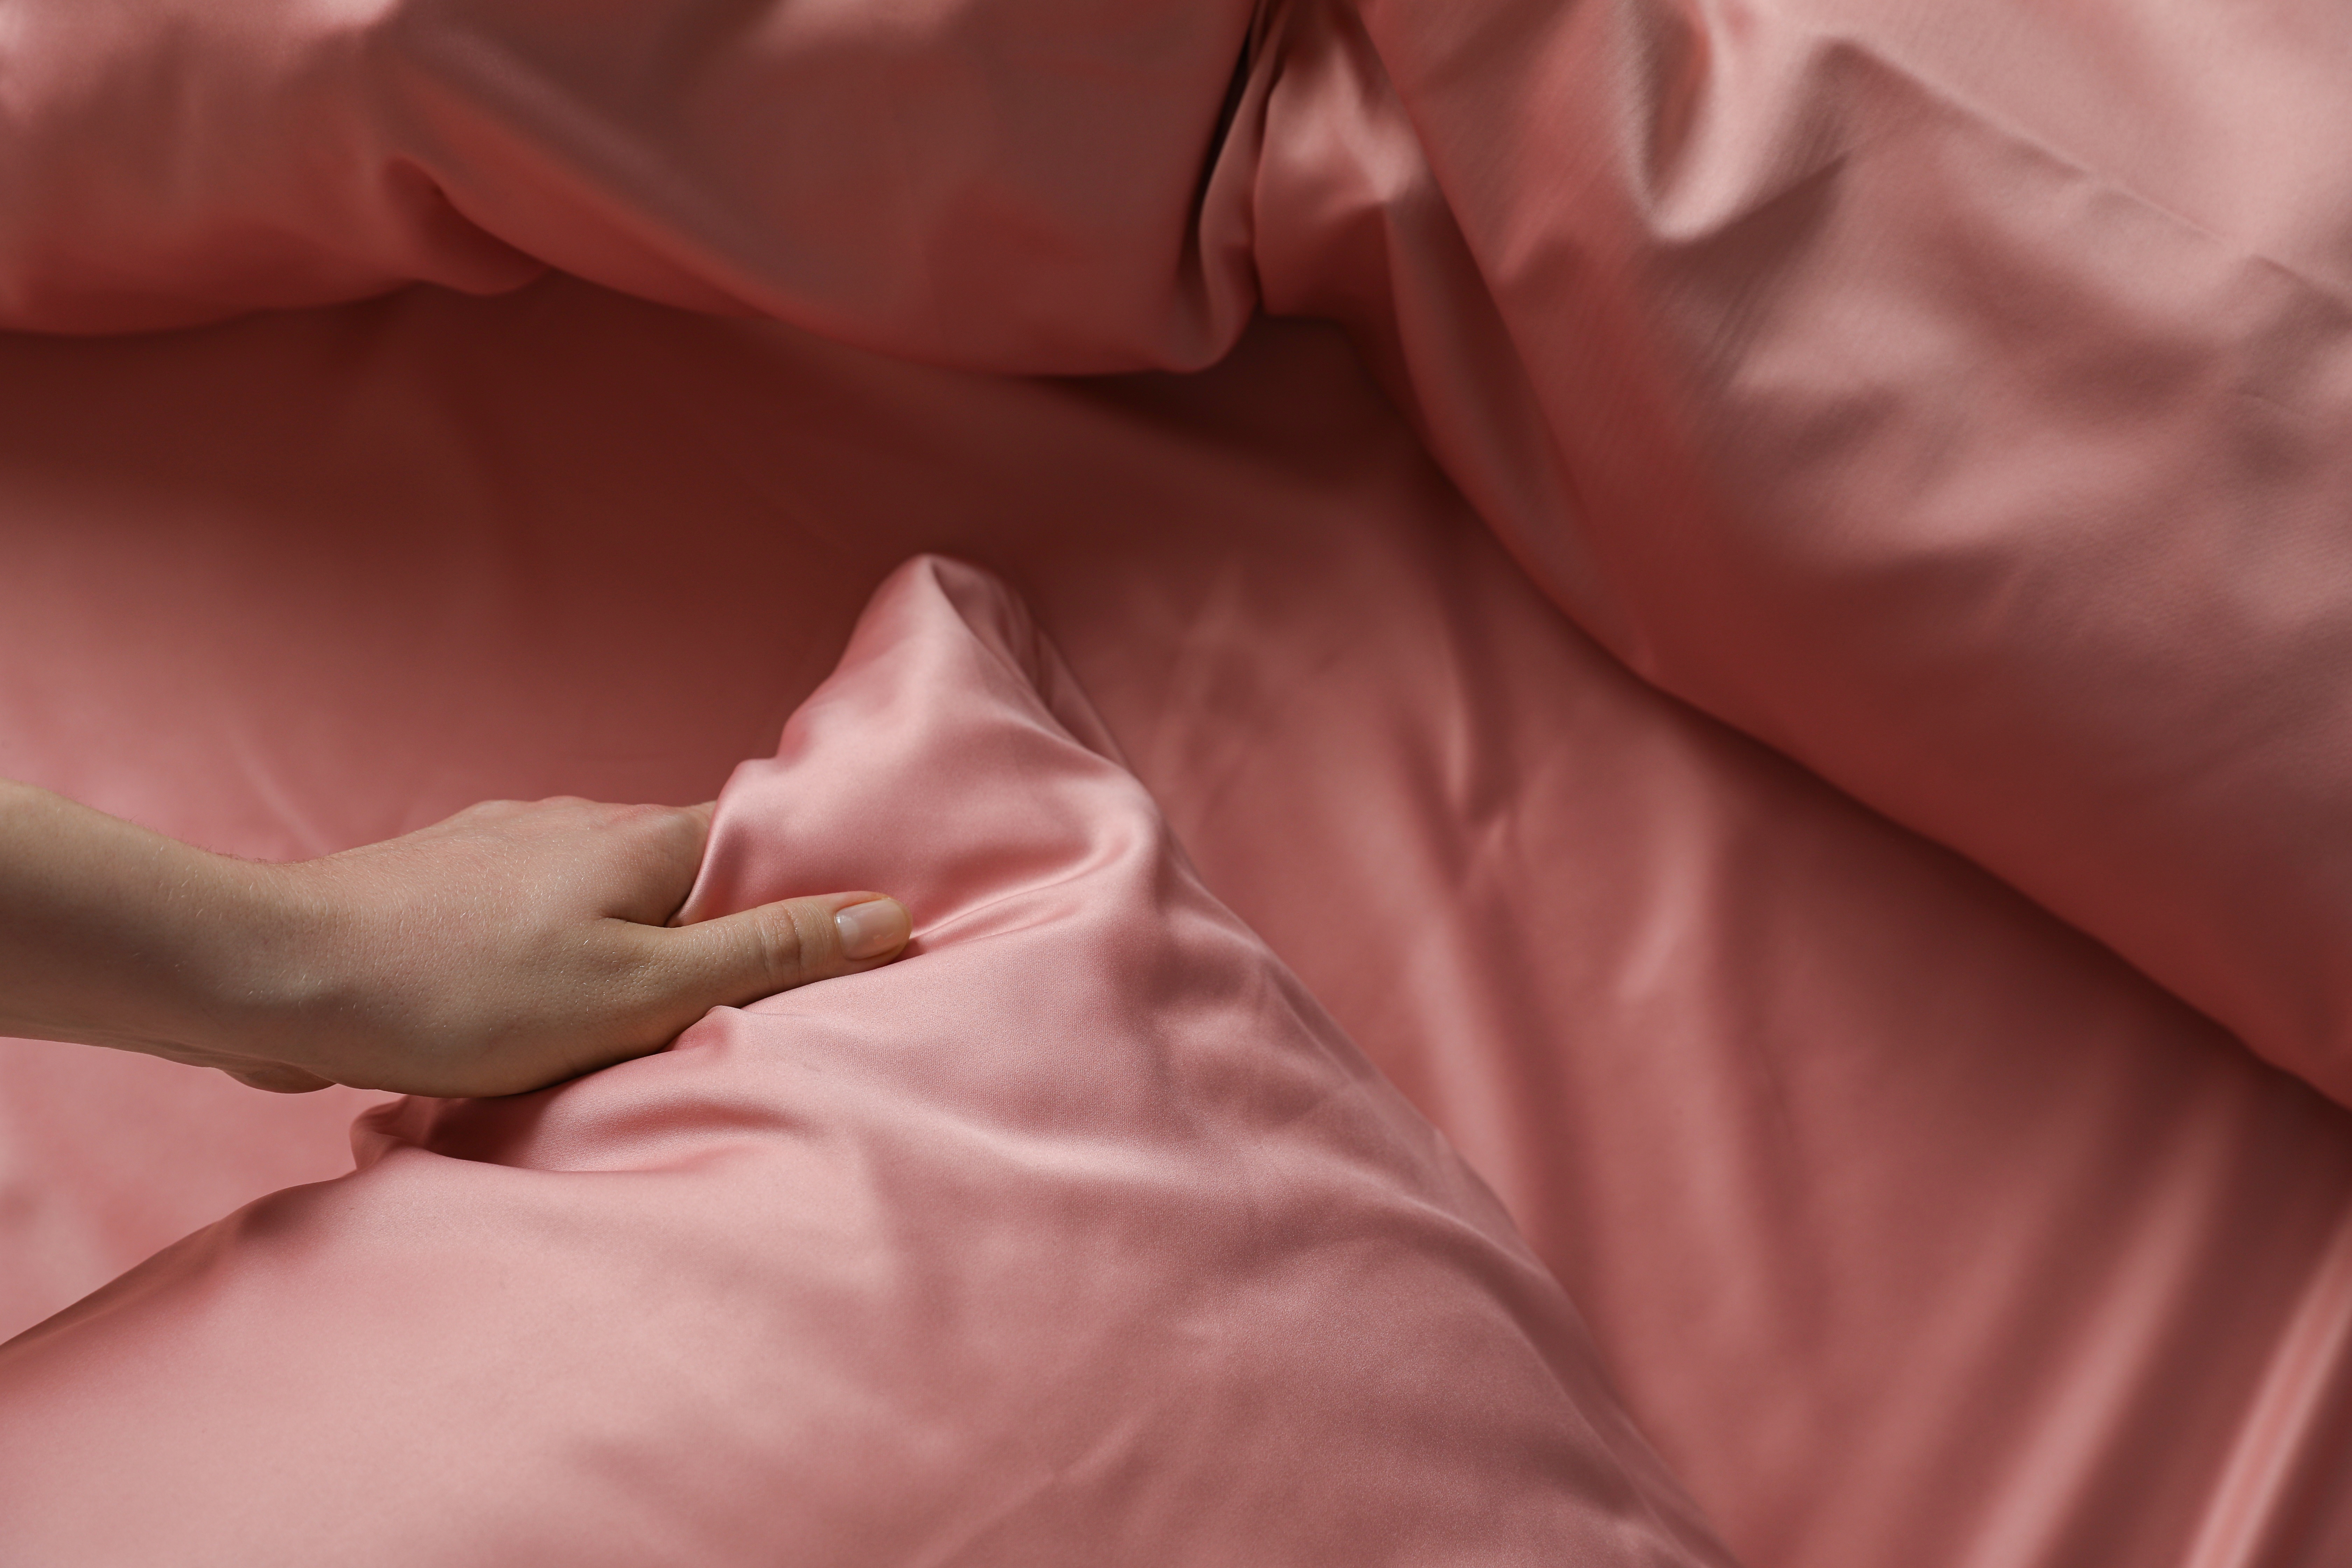 A woman makes up a bed with luxurious pink linen. | Source Getty Images